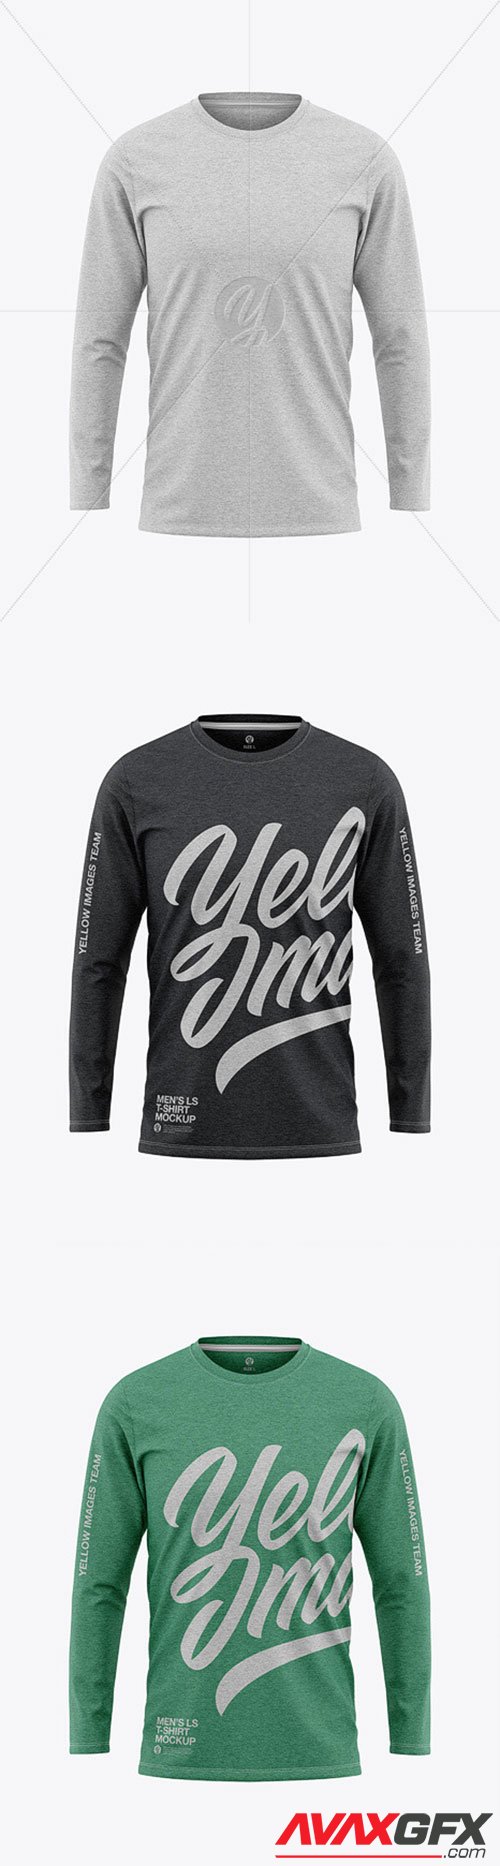 Download Men's Heather Long Sleeve T-Shirt Mockup - Front View ...